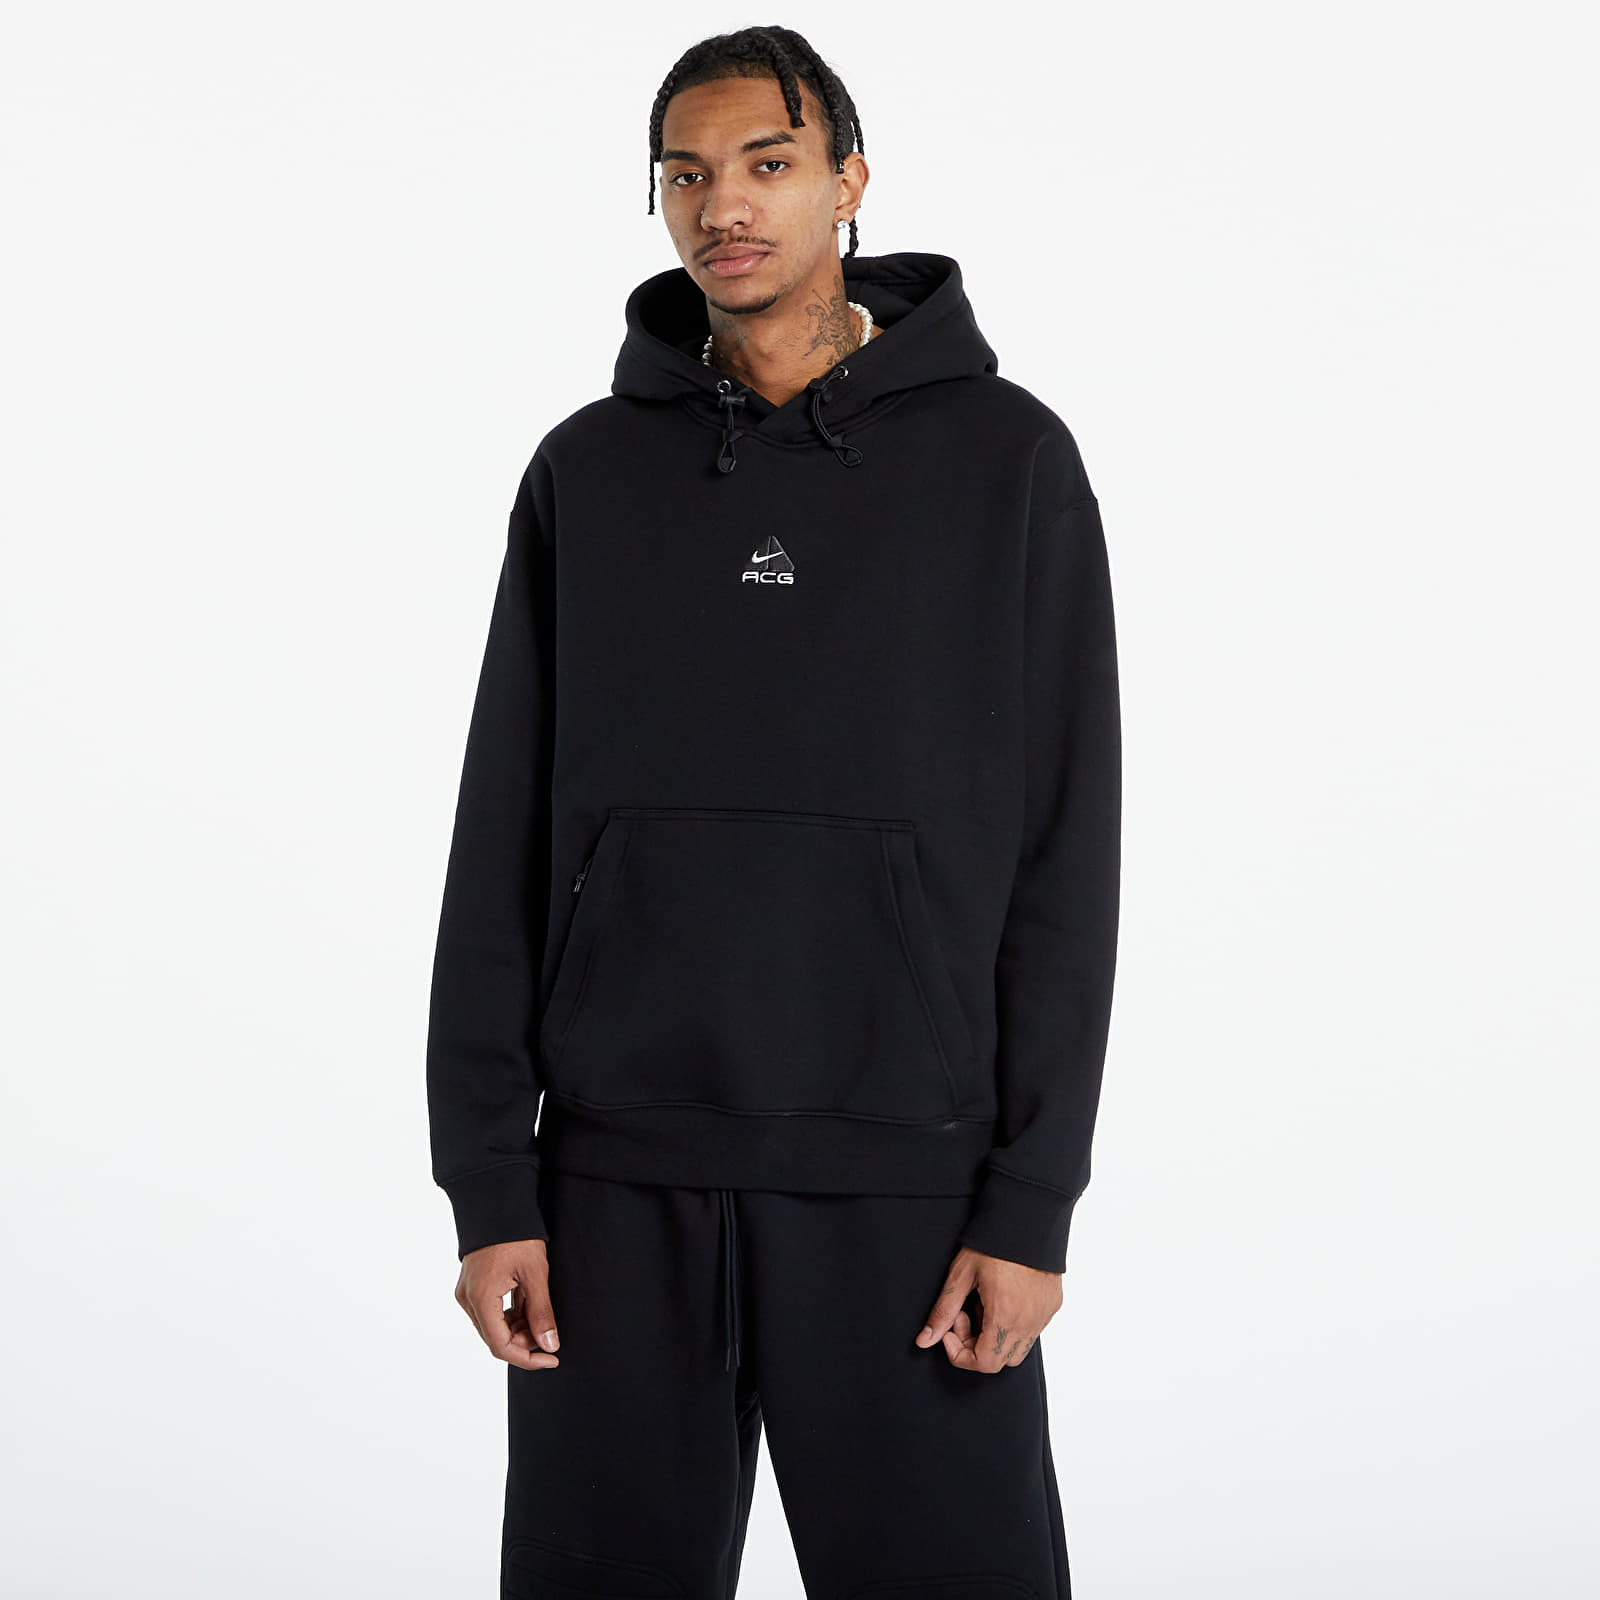 Nike - acg therma-fit fleece pullover hoodie unisex black/ anthracite/ summit white